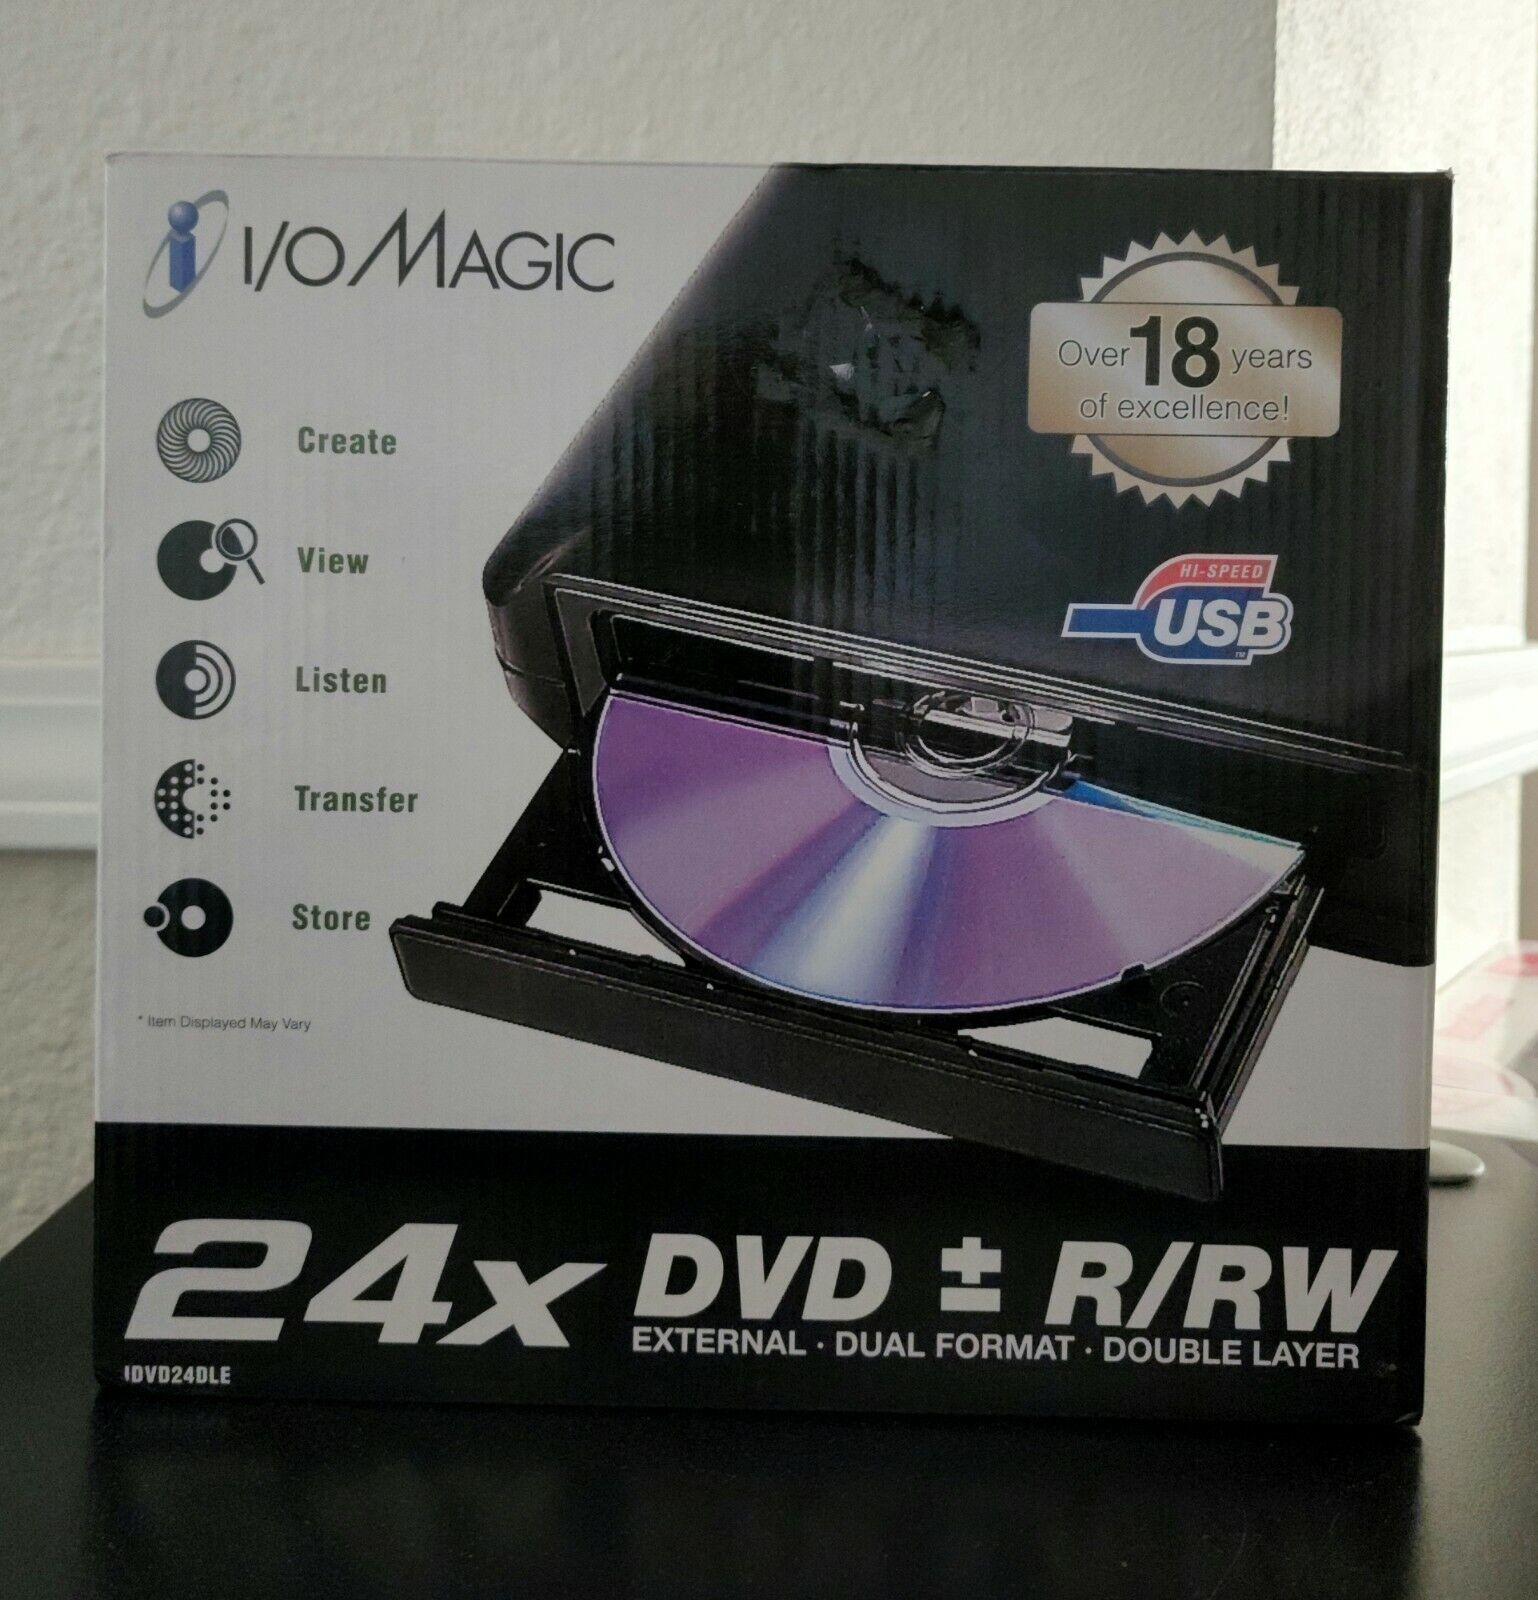 I/Omagic External DVD+/-R/RW Drive 24x Dual Format/Double Layer IDVD24DLE